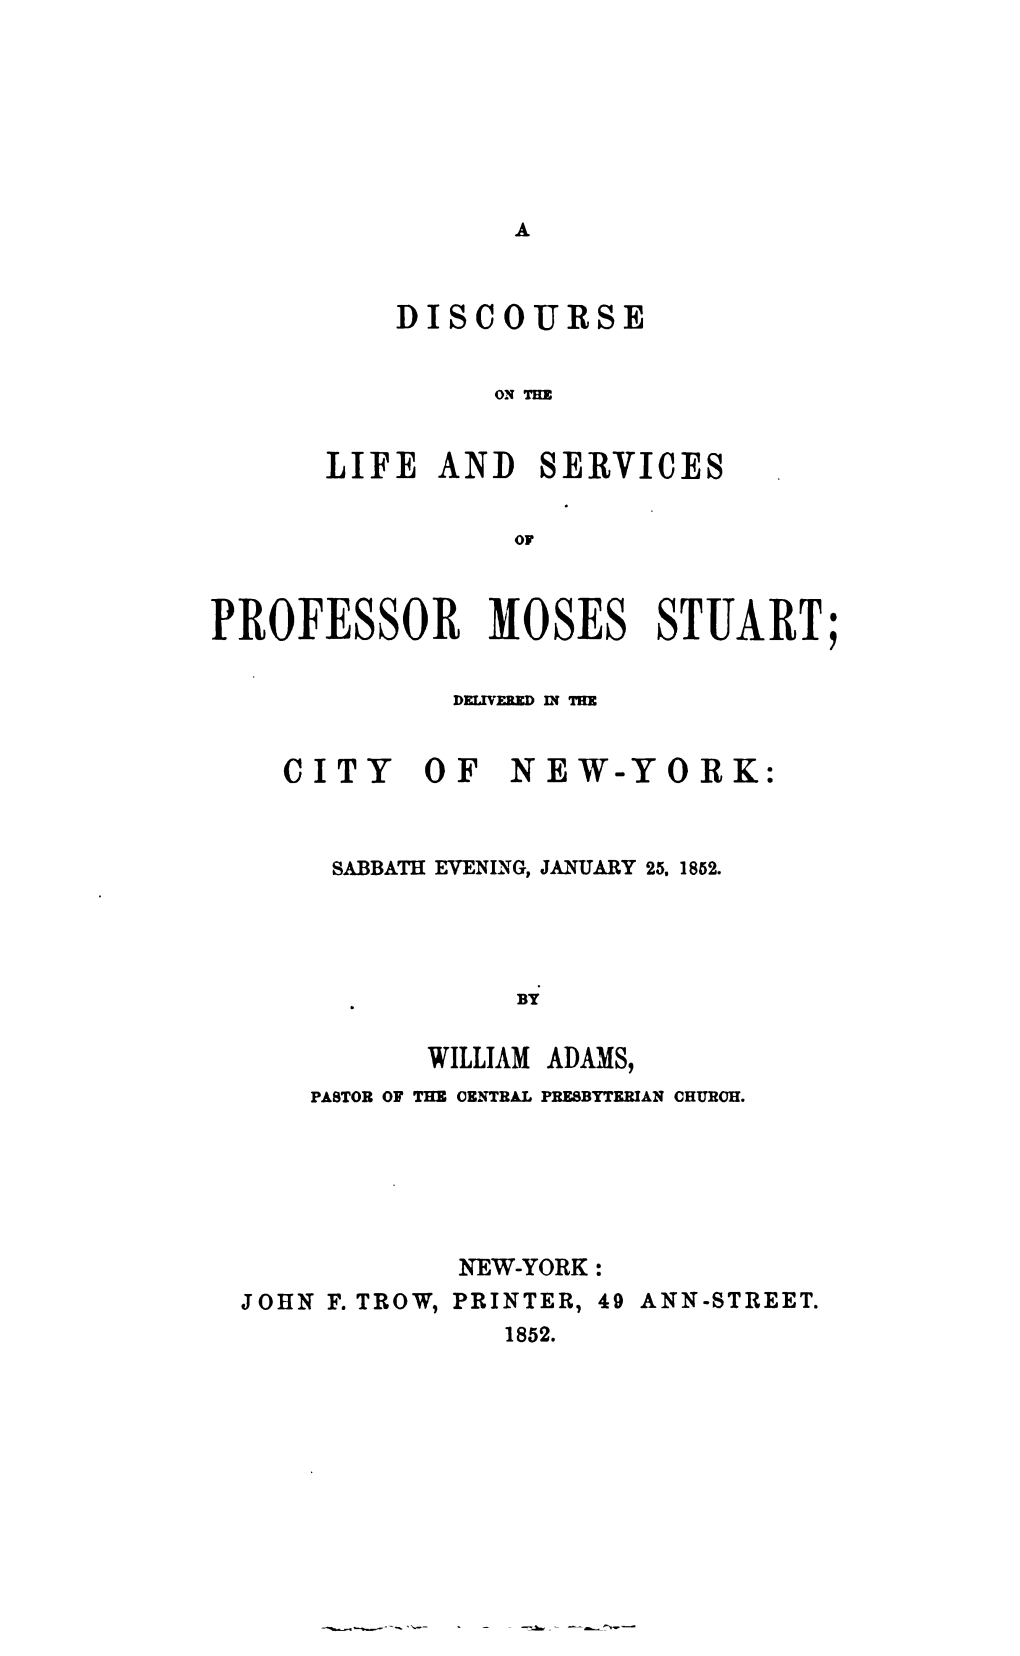 A Discourse on the Life and Services of Professor Moses Stuart